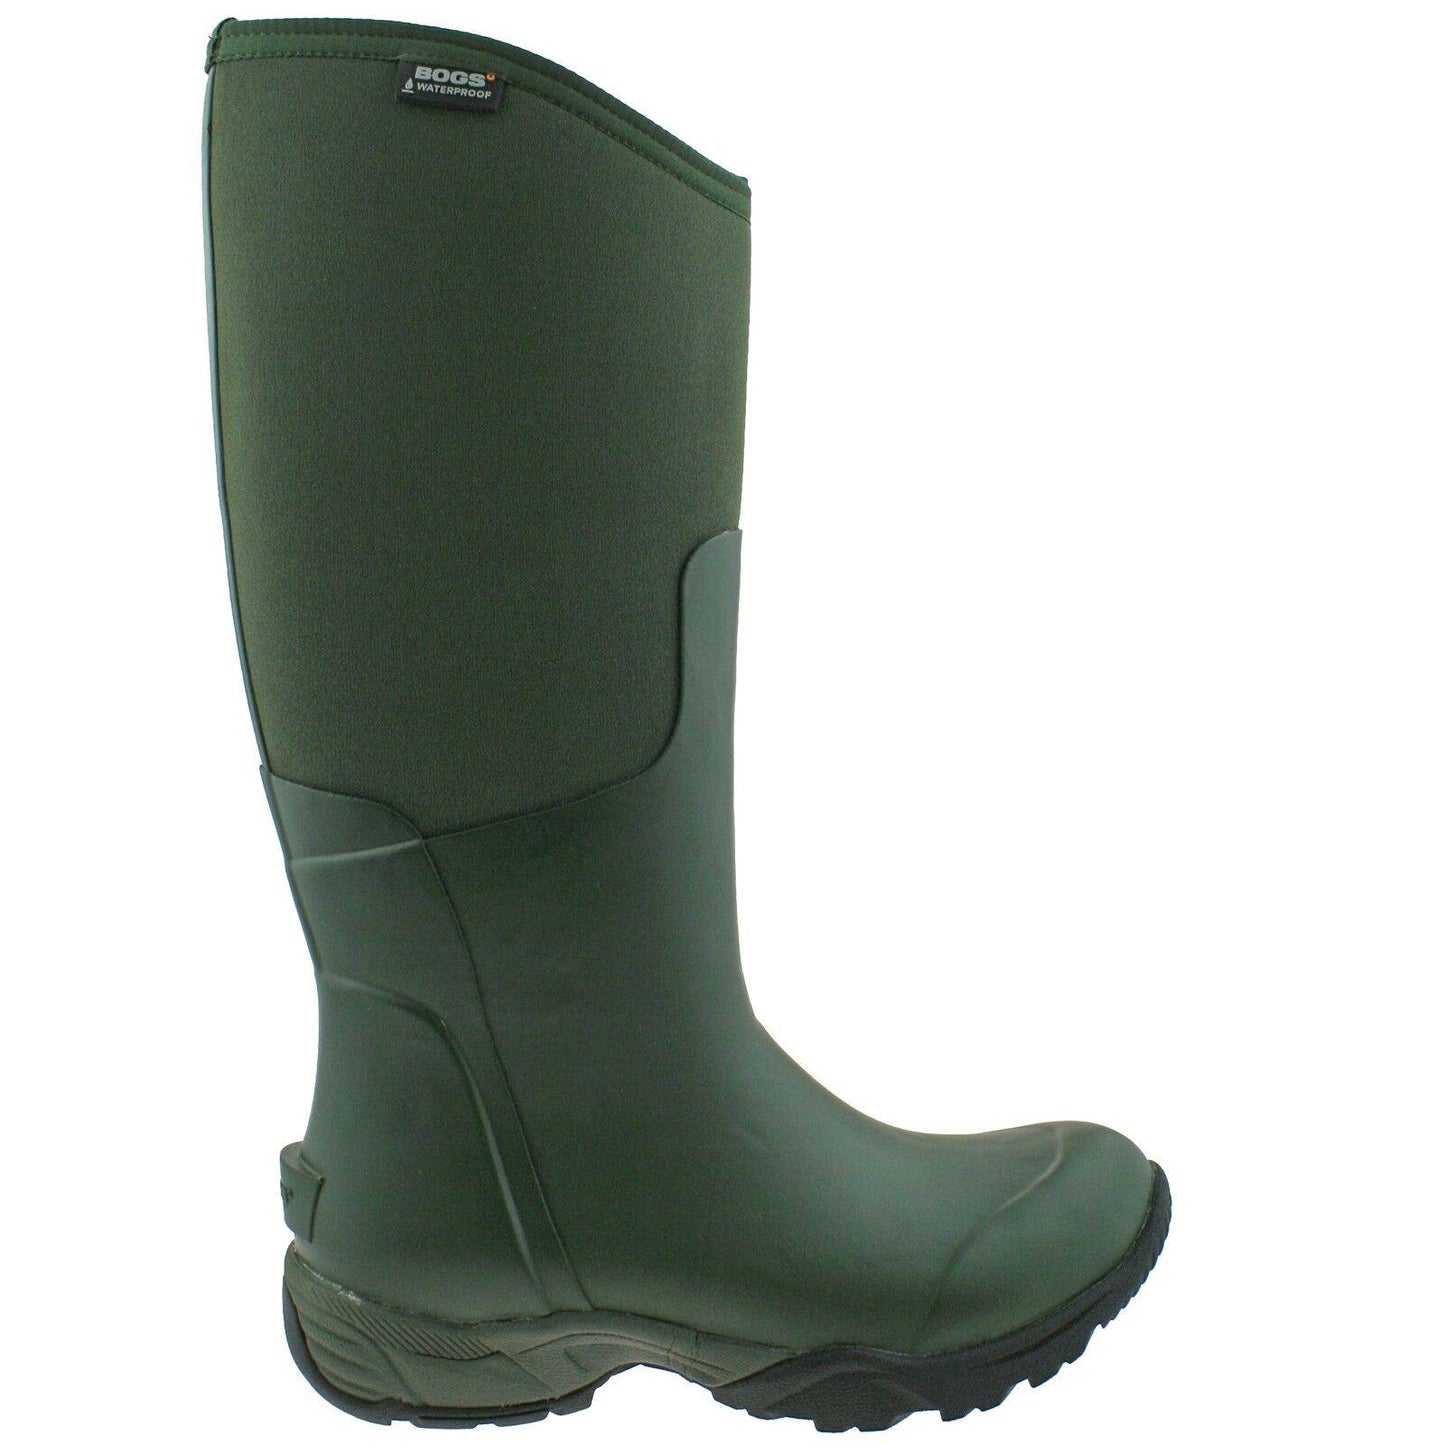 Ladies Bogs Essential Tall Solid Olive Insulated Warm Wellies Boot 78583 303